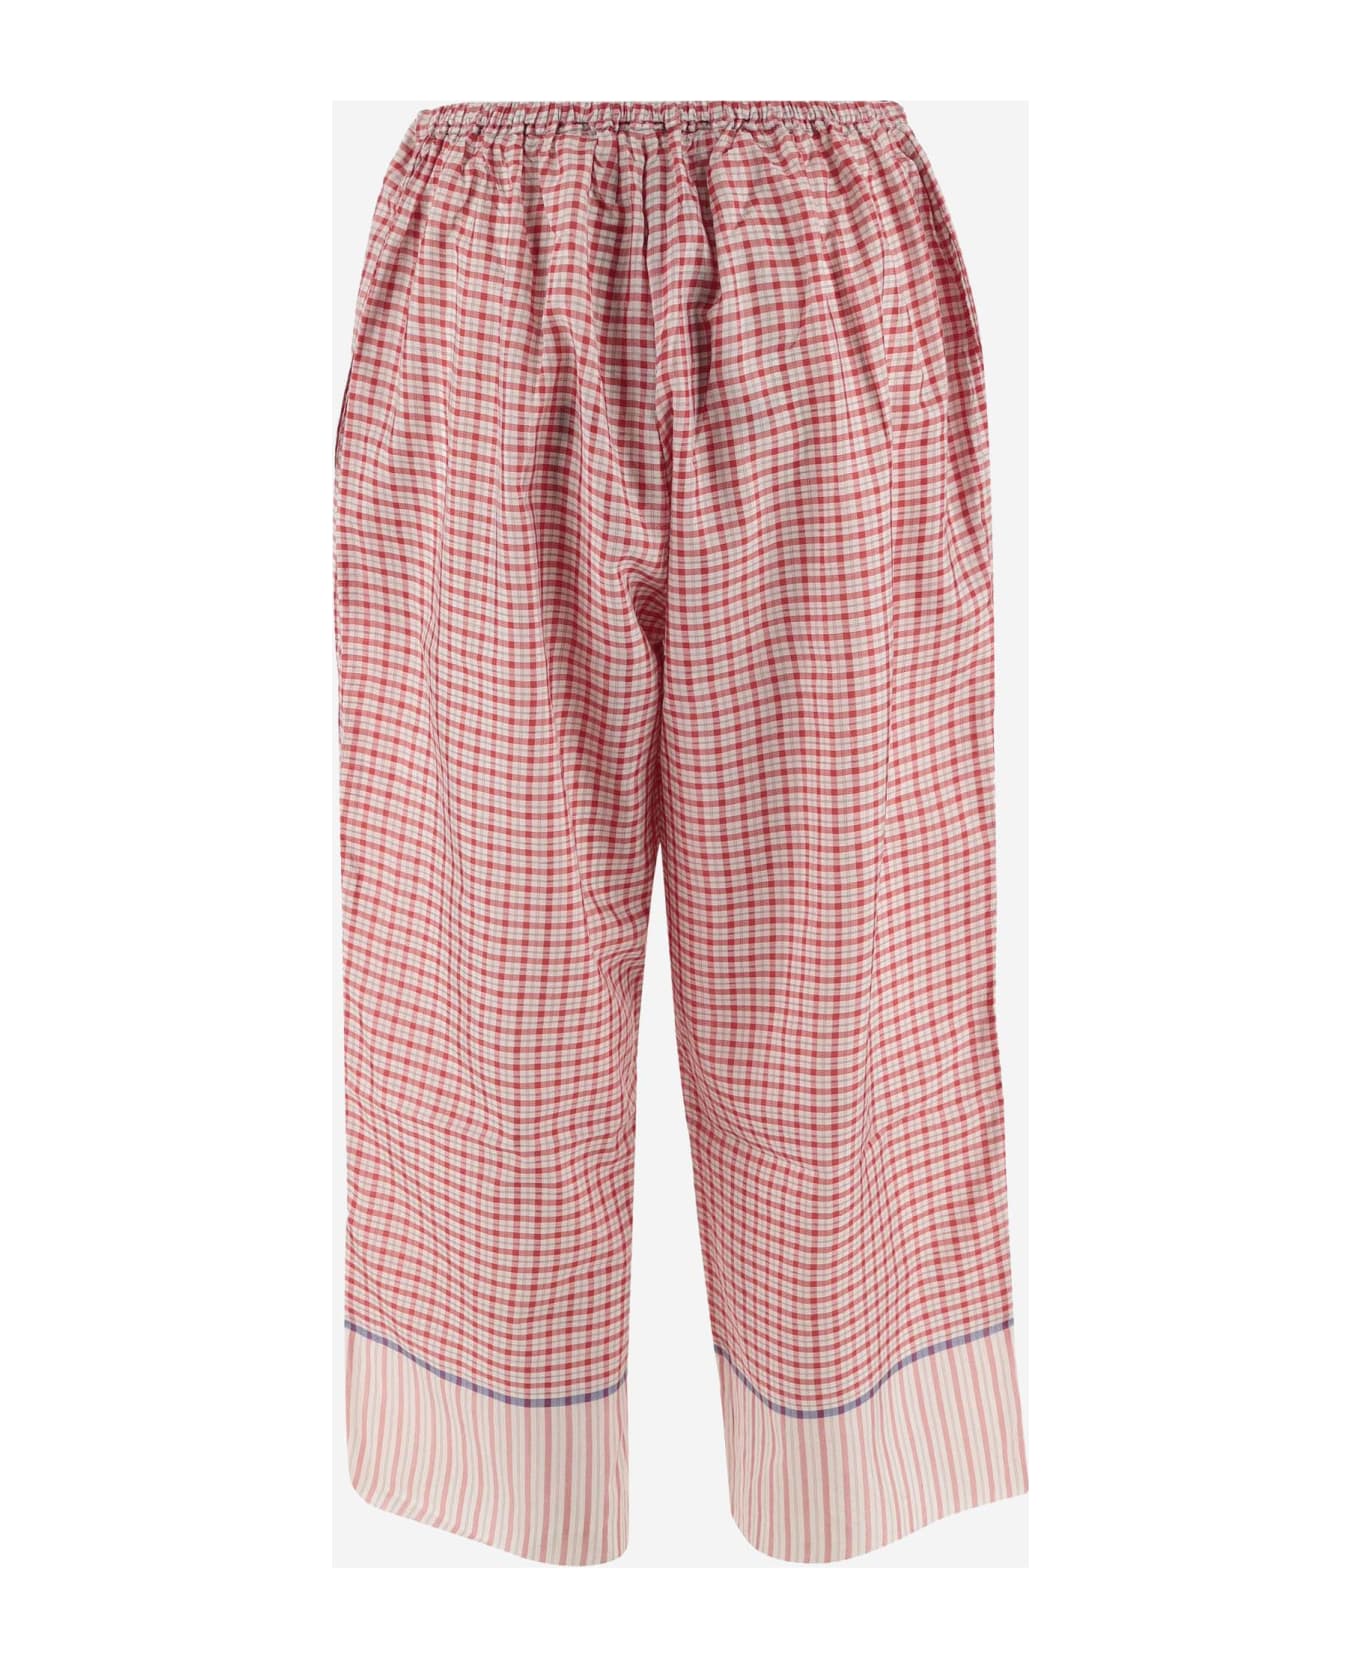 Péro Pure Silk Pants With Check Pattern - Red ボトムス